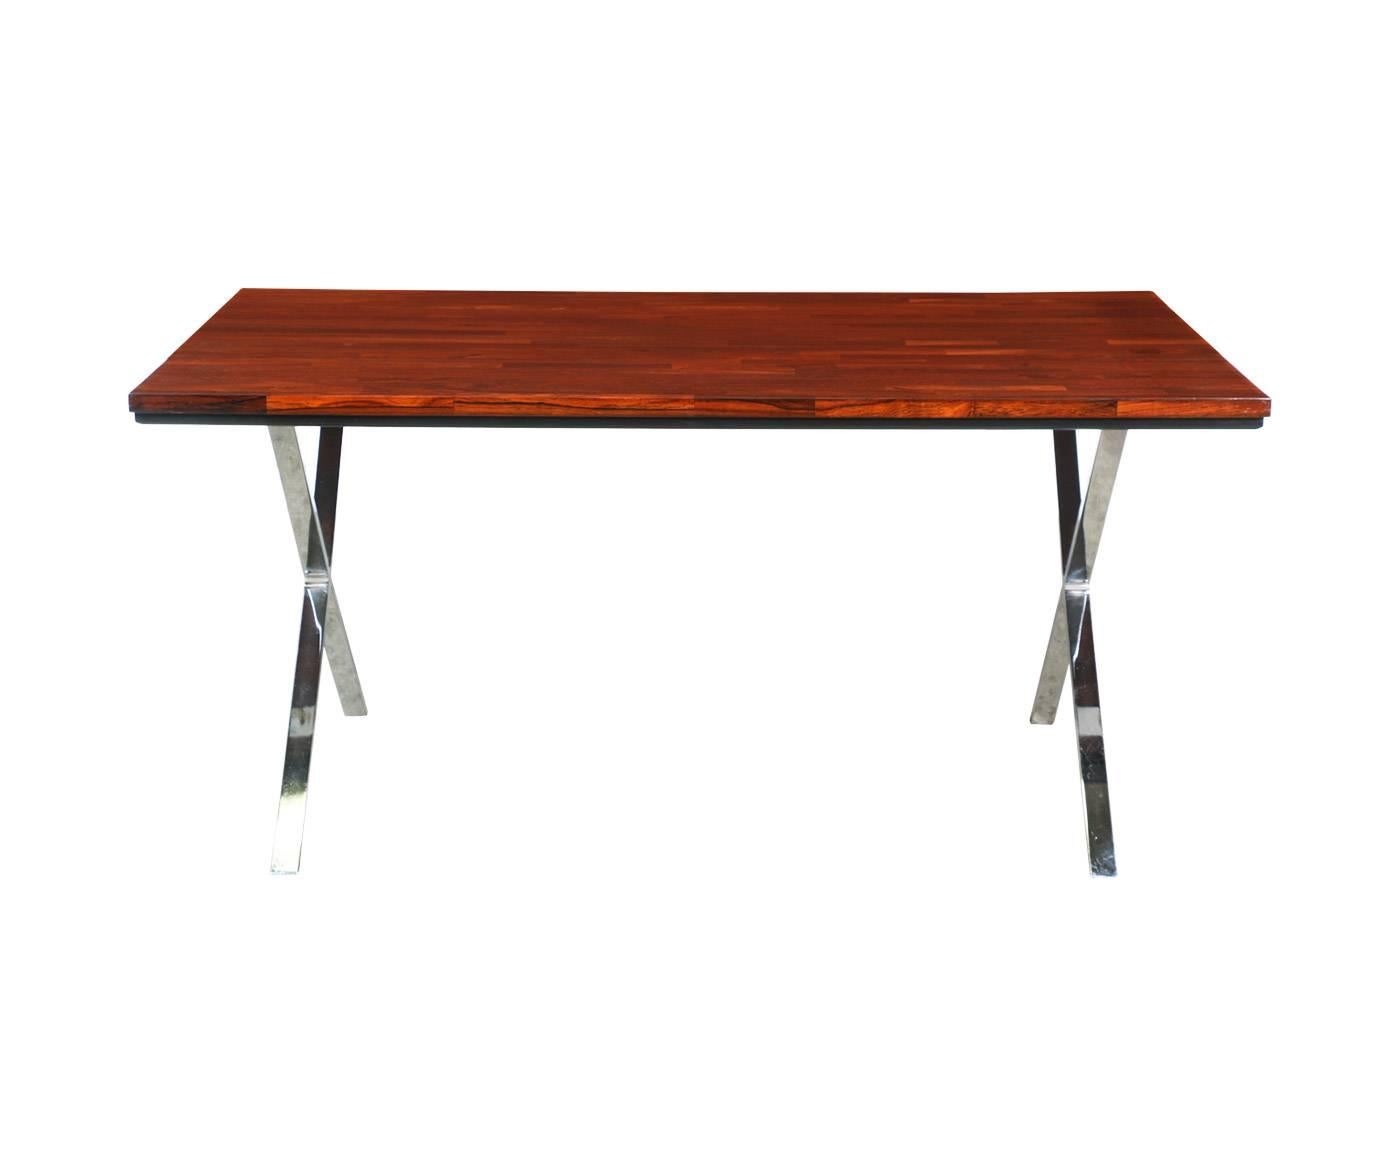 Designer: Unknown.
Manufacturer: Unknown.
Period/Style: Mid-Century Modern.
Country: United States.
Date: 1960s.

Dimensions: 28″ H x 60″ W x 36″ D.
Materials: Rosewood, chrome shows some minor wear.
Condition: Excellent, newly